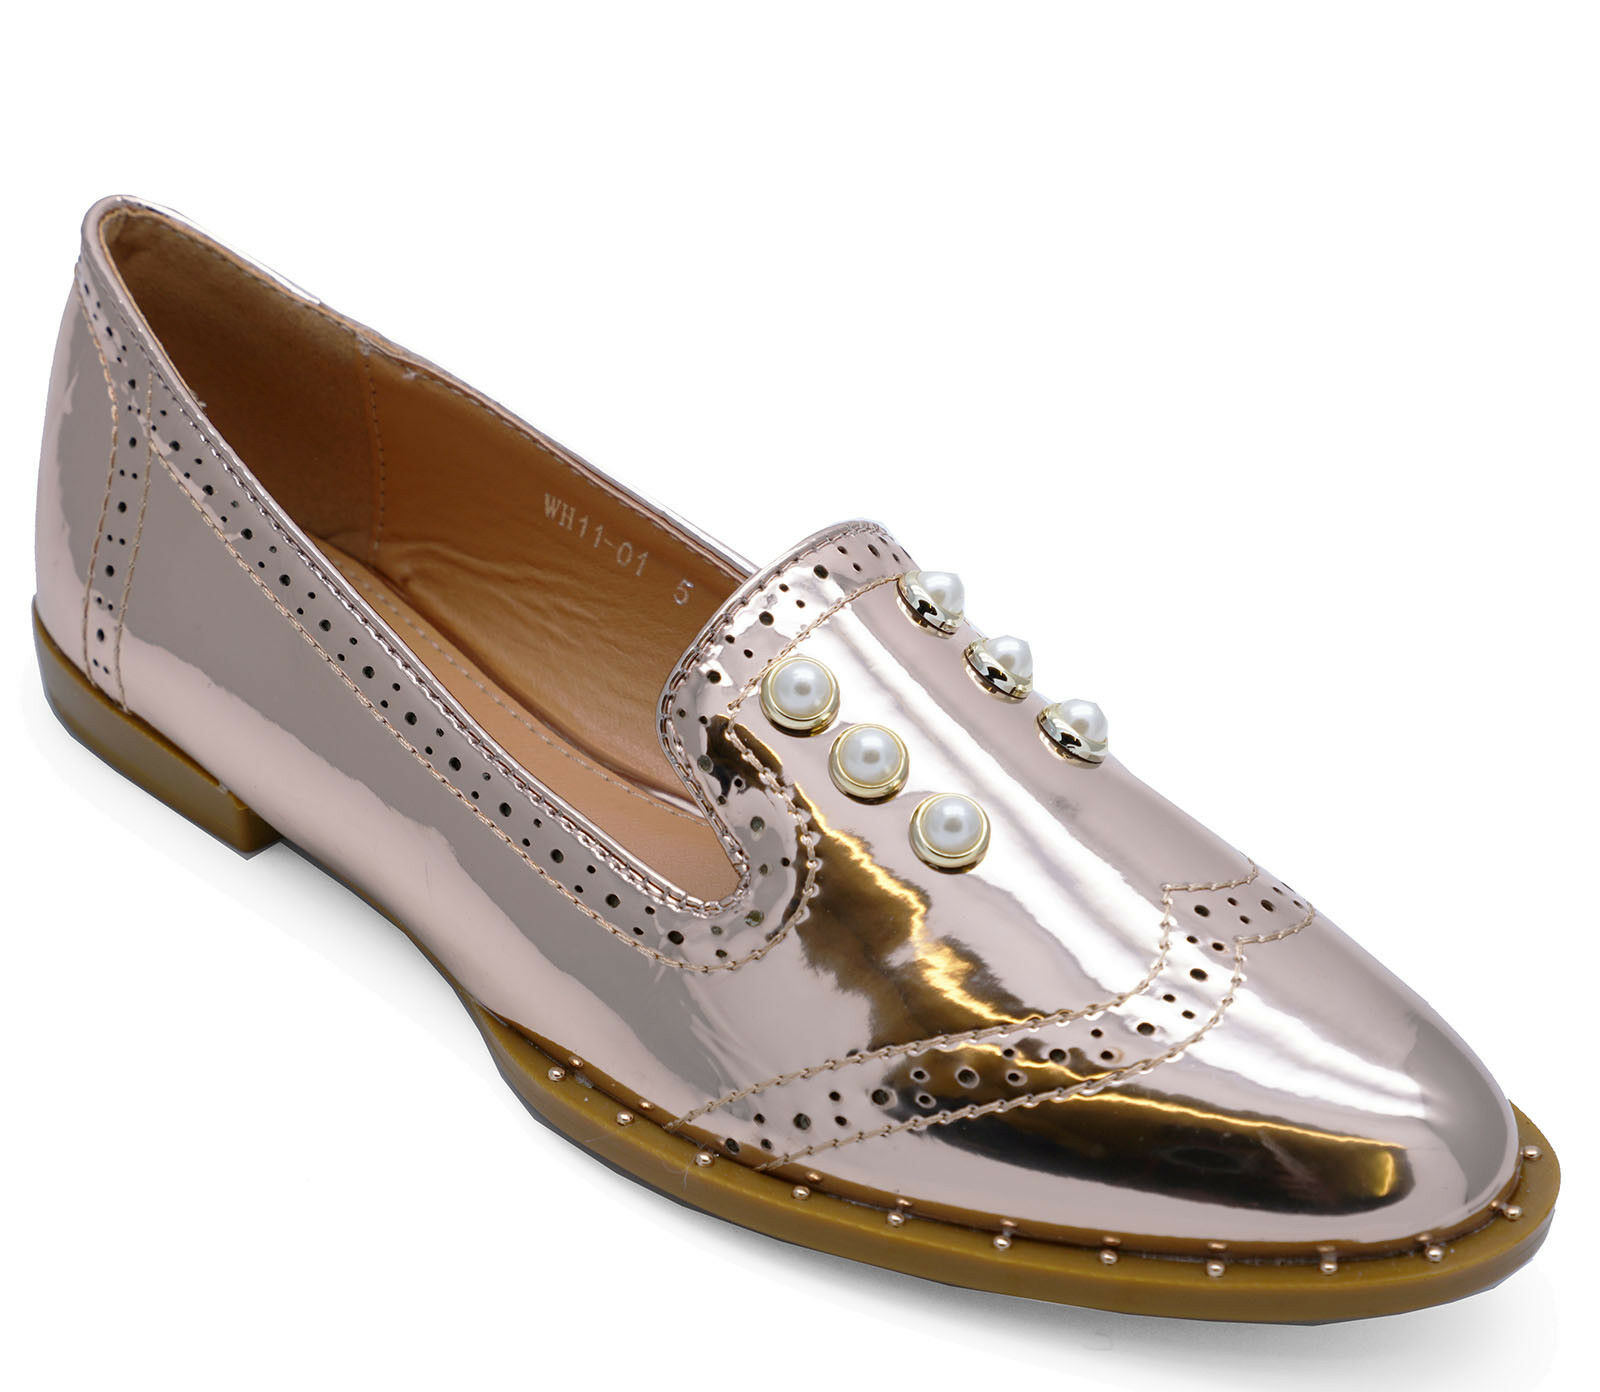 WOMENS GOLD PATENT SLIP-ON LOAFERS SMART CASUAL COMFY WORK FLAT SHOES SIZES 3-8 